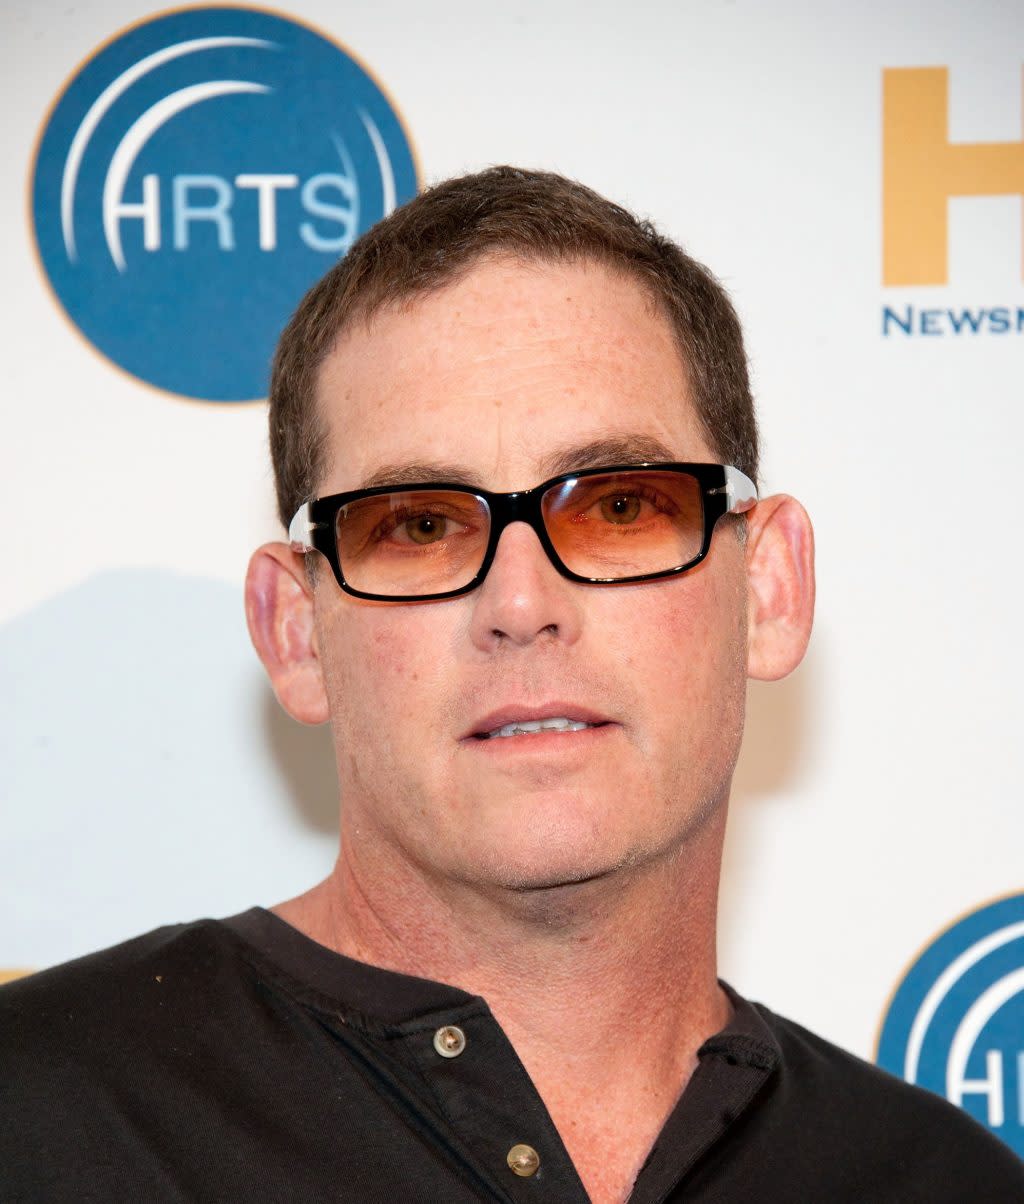 BEVERLY HILLS, CA - APRIL 26: Executive Producer Mike Fleiss arrives at The Hollywood Radio & Television Society Presents "The Unscripted Hitmakers" luncheon at The Beverly Hilton Hotel on April 26, 2012 in Beverly Hills, California. (Photo by Amanda Edwards/Getty Images)